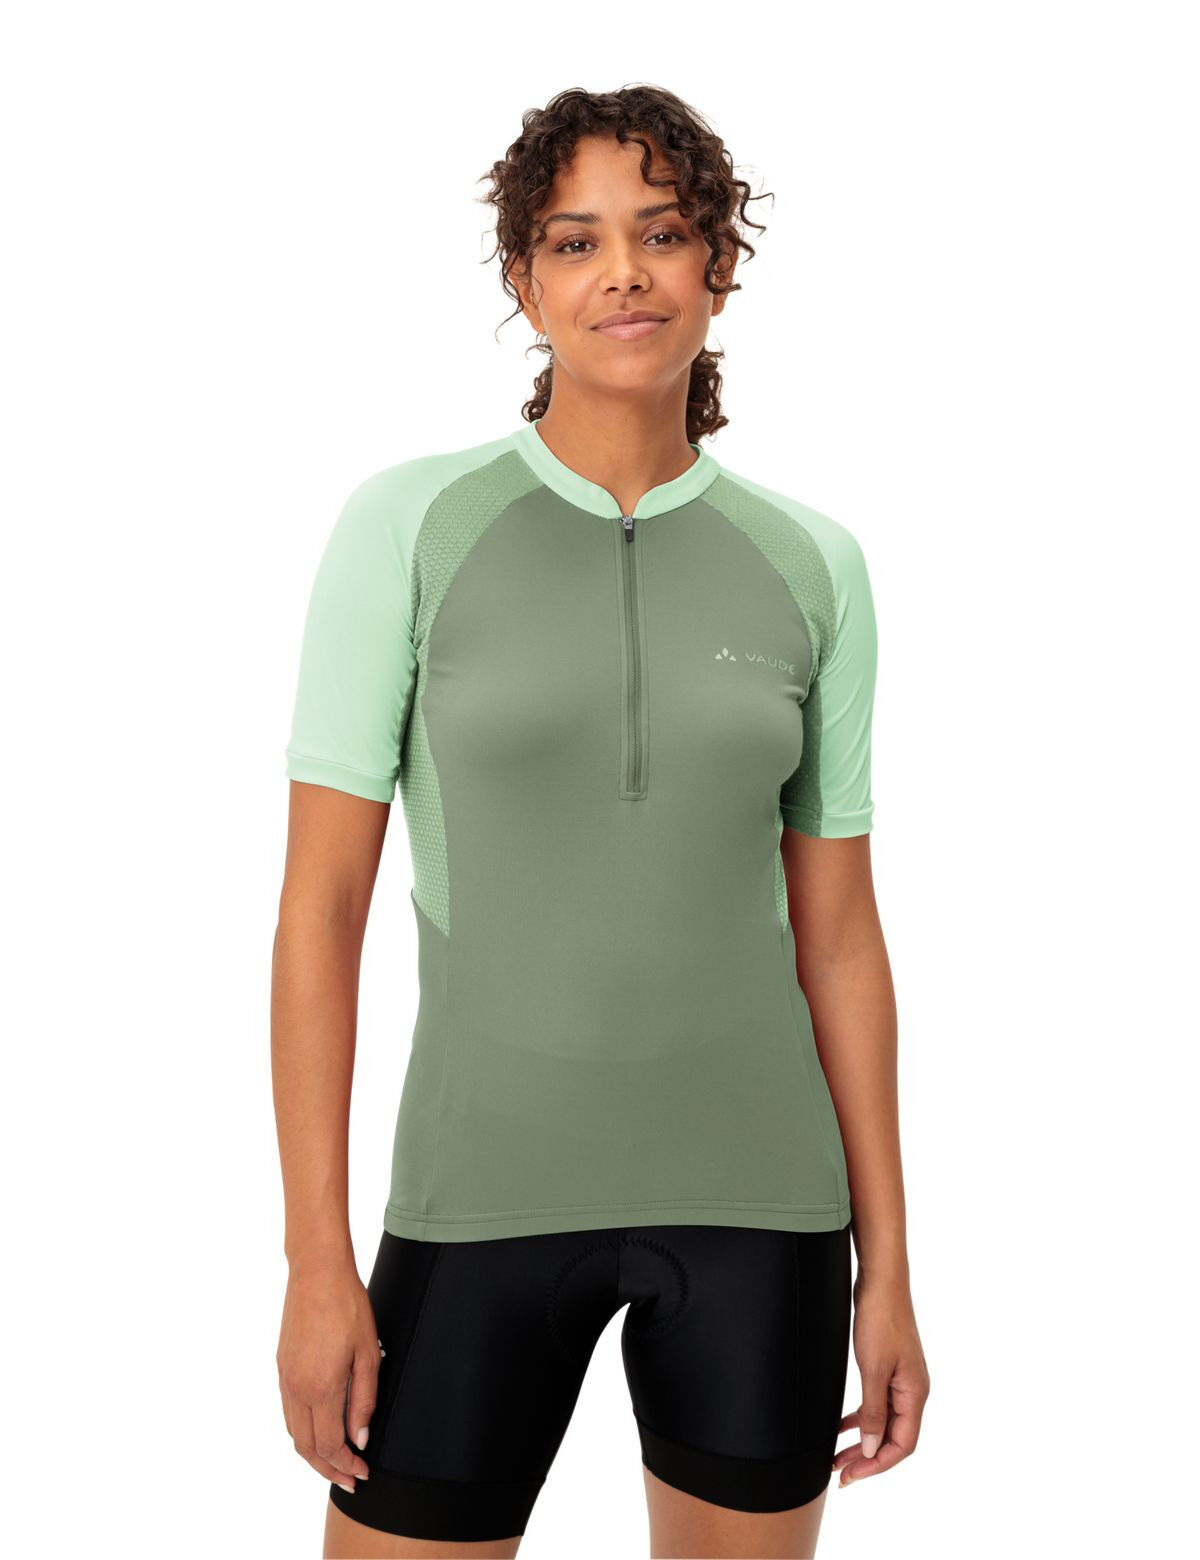 Vaude Advanced Tricot IV - Maillot ciclismo - Mujer